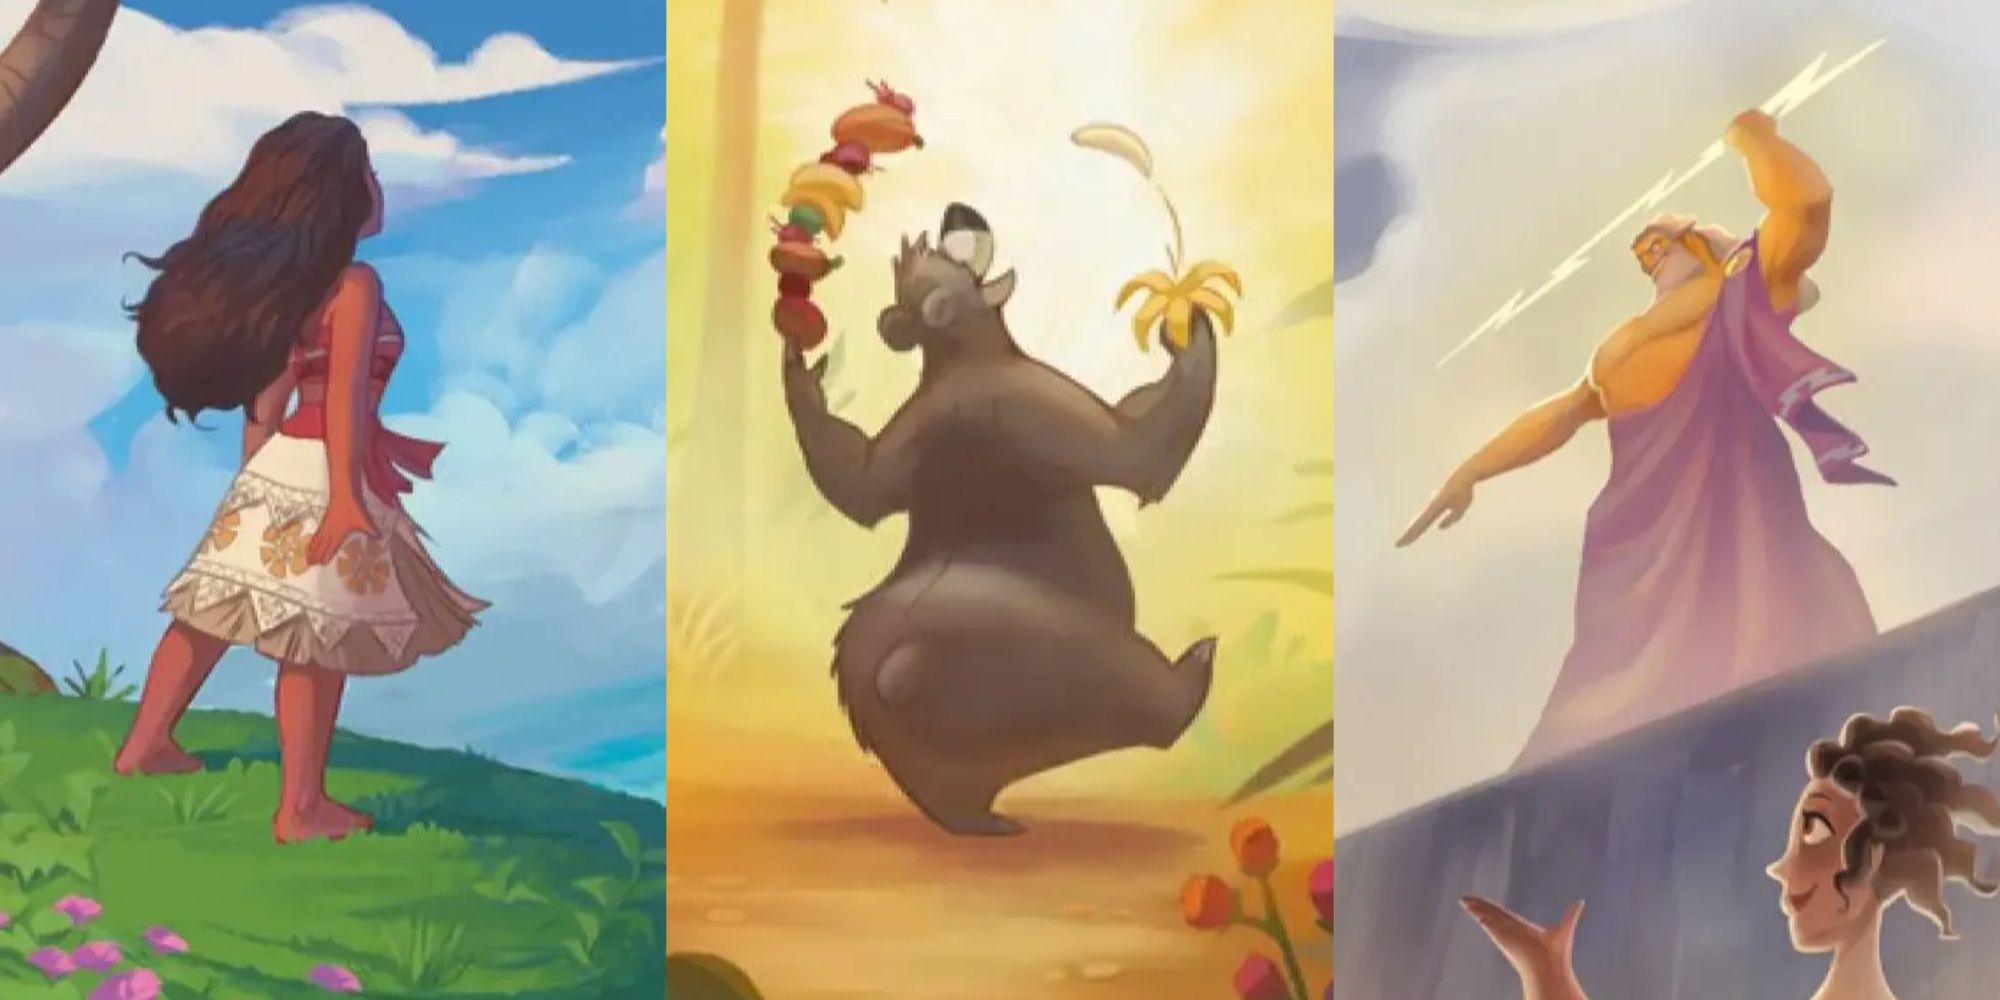 inklands best songs featuring how far i'll go, bare necessities, and and then along came zeus